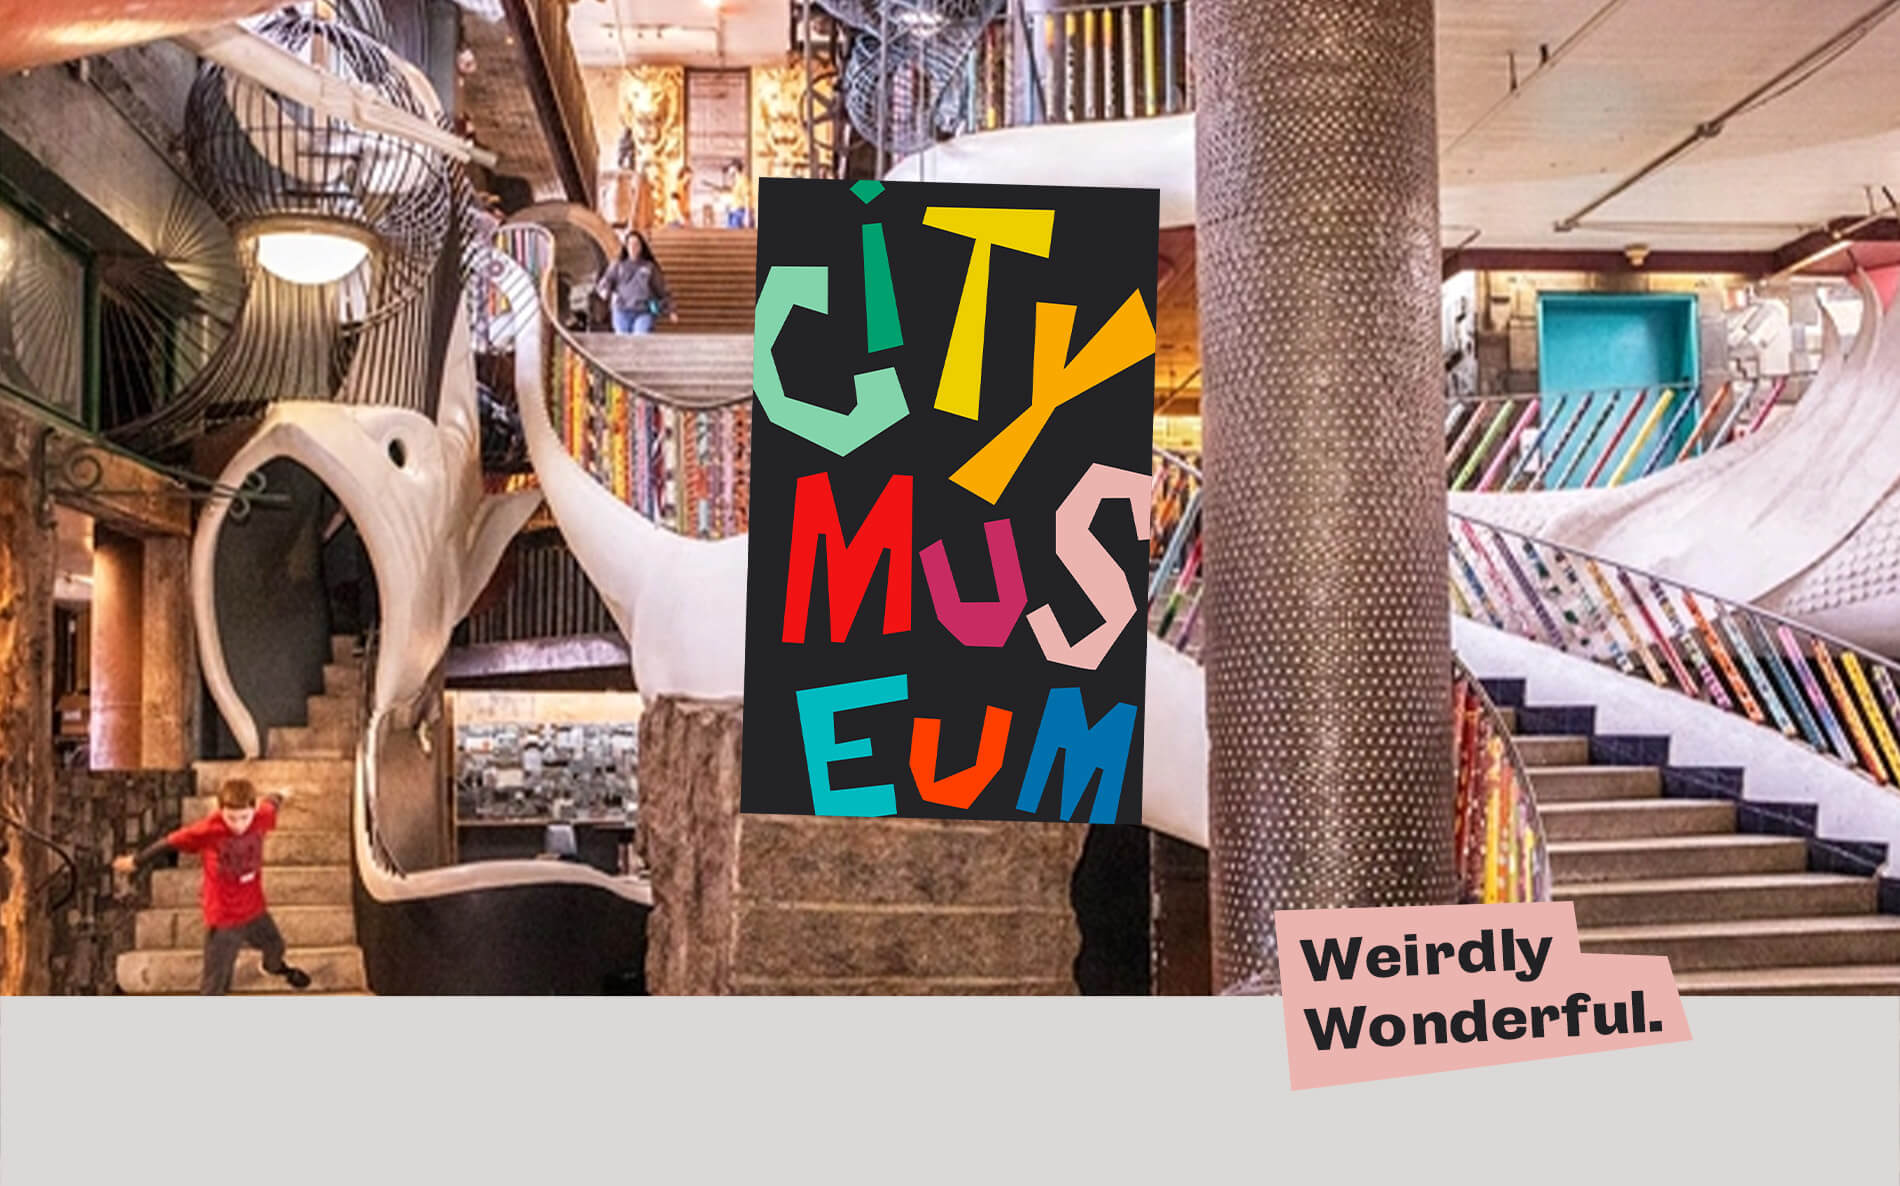 City Museum's new logo and tagline